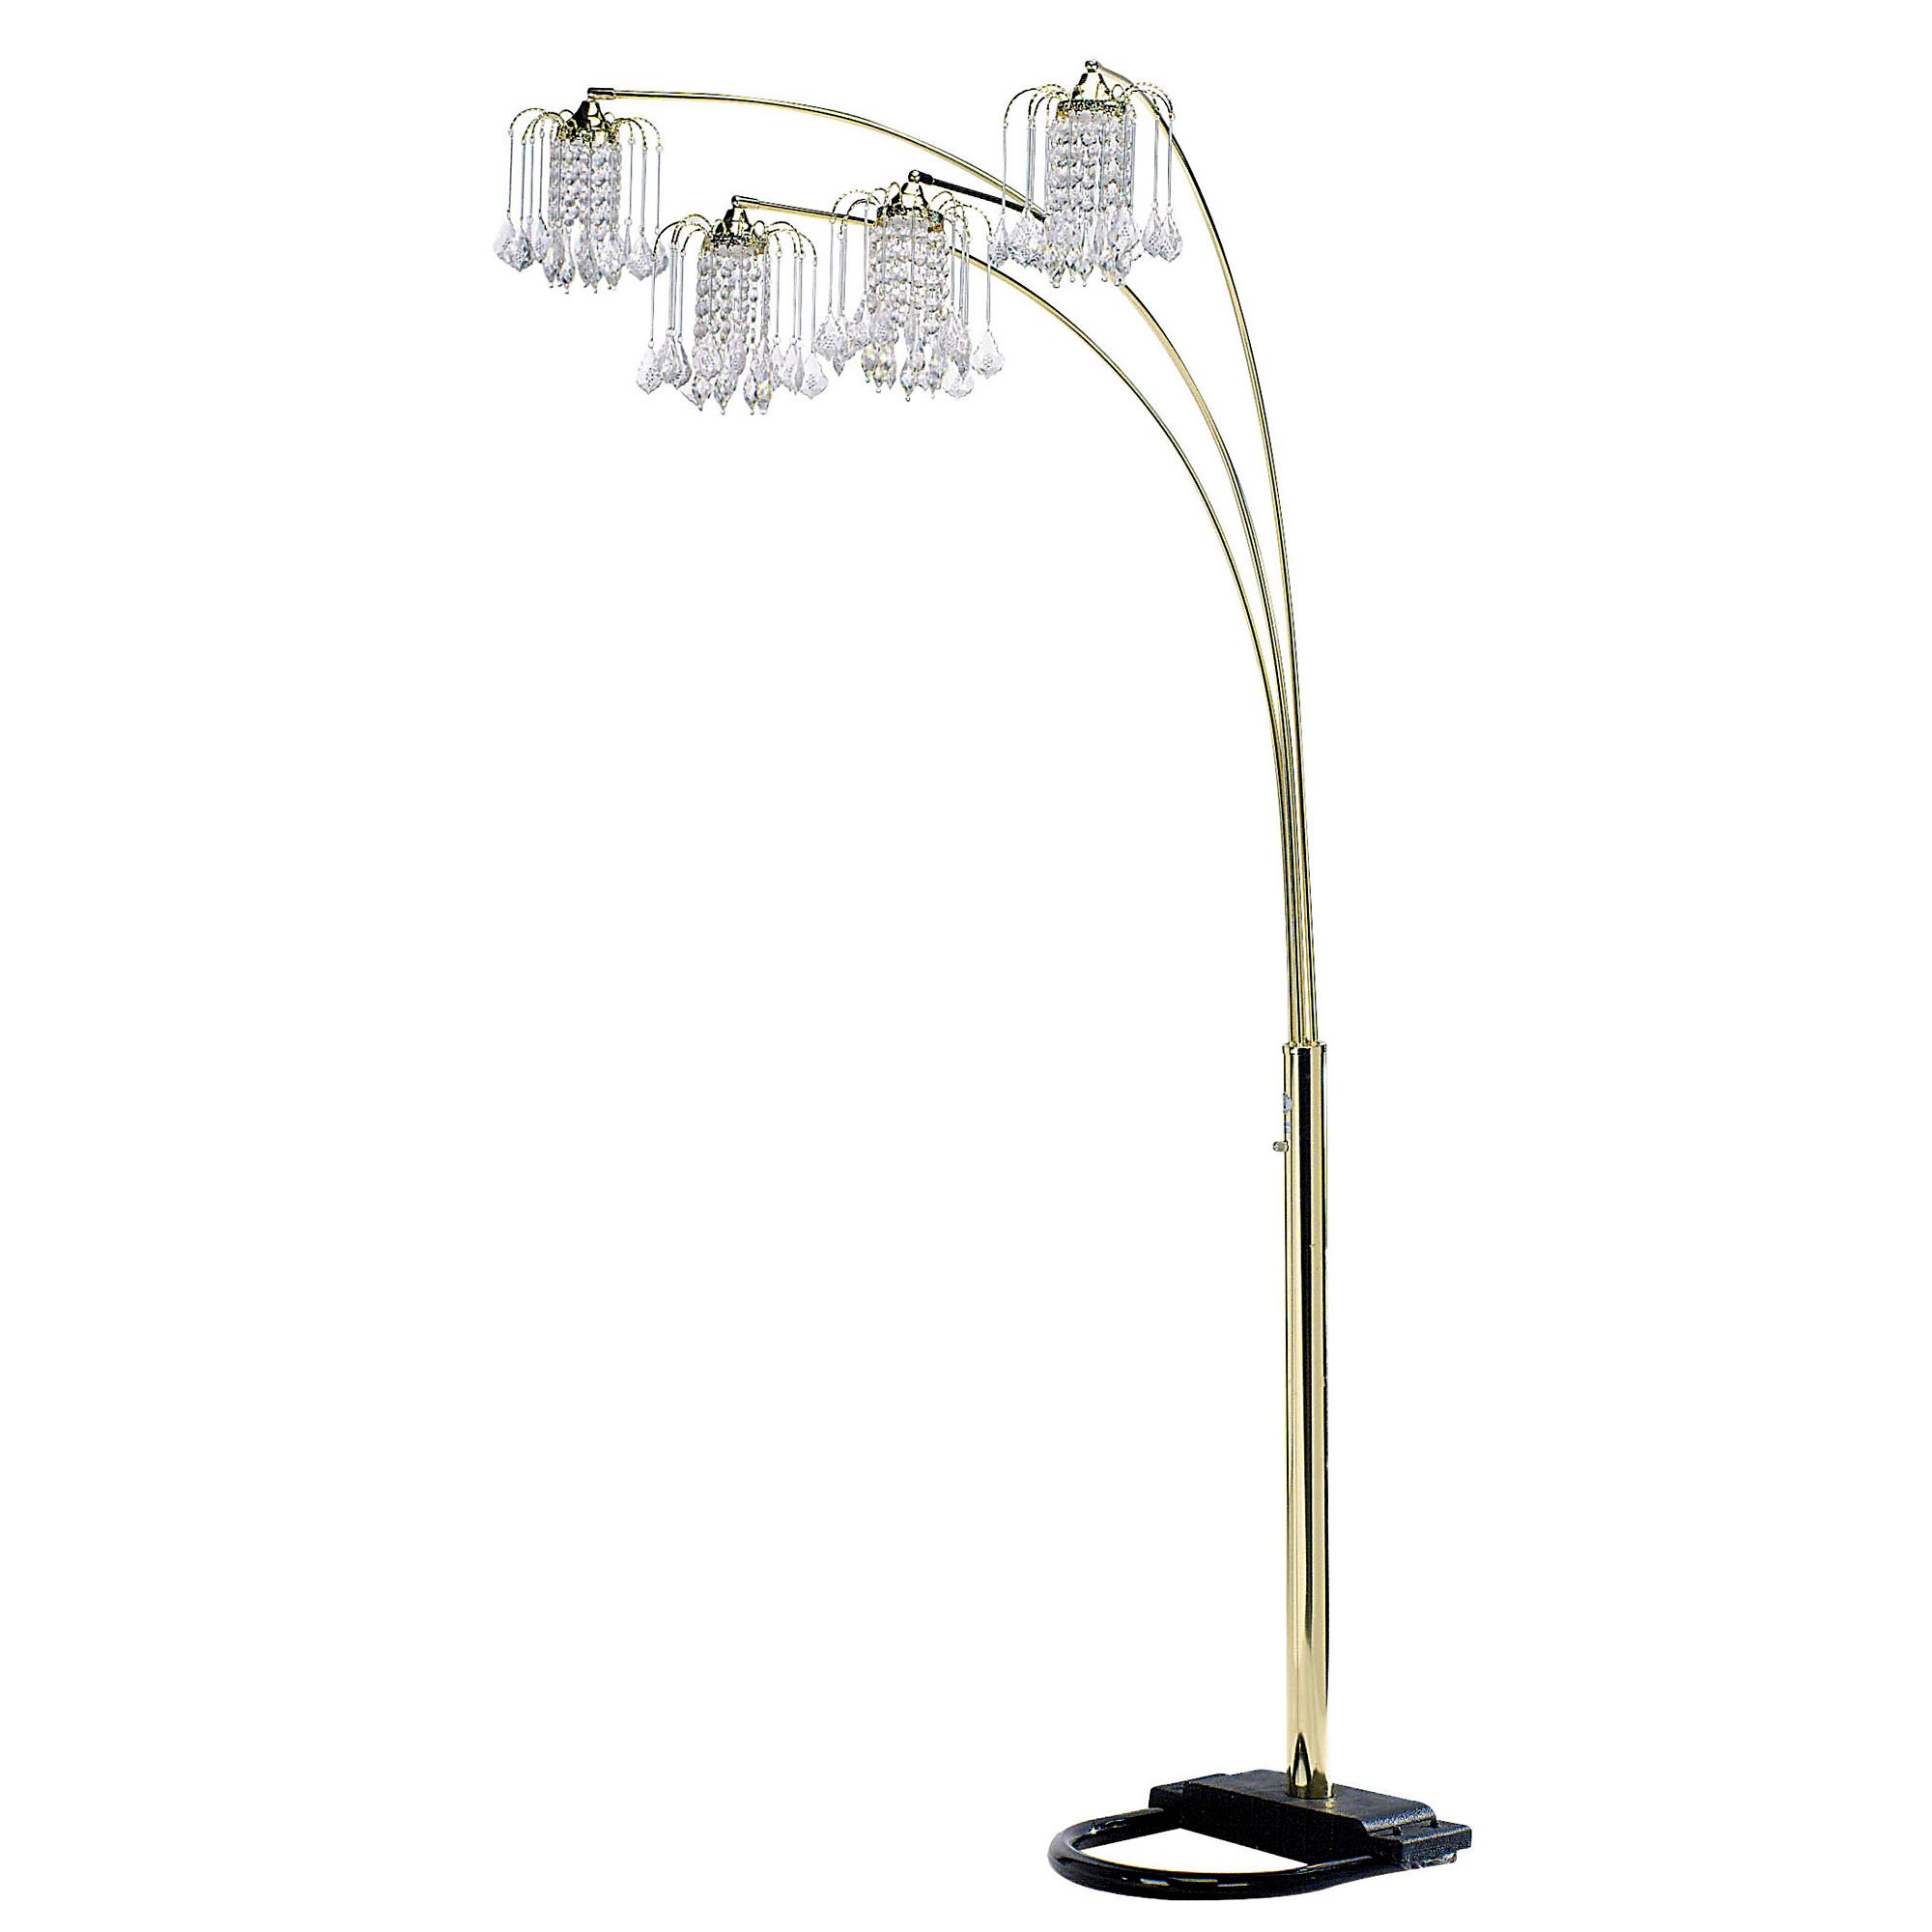 Newest Ore International 84" Tall Metal Floor Lamp With Brass Finish, Crystal  Chandelier Design – Walmart For Chandelier Style Floor Lamps (View 14 of 15)